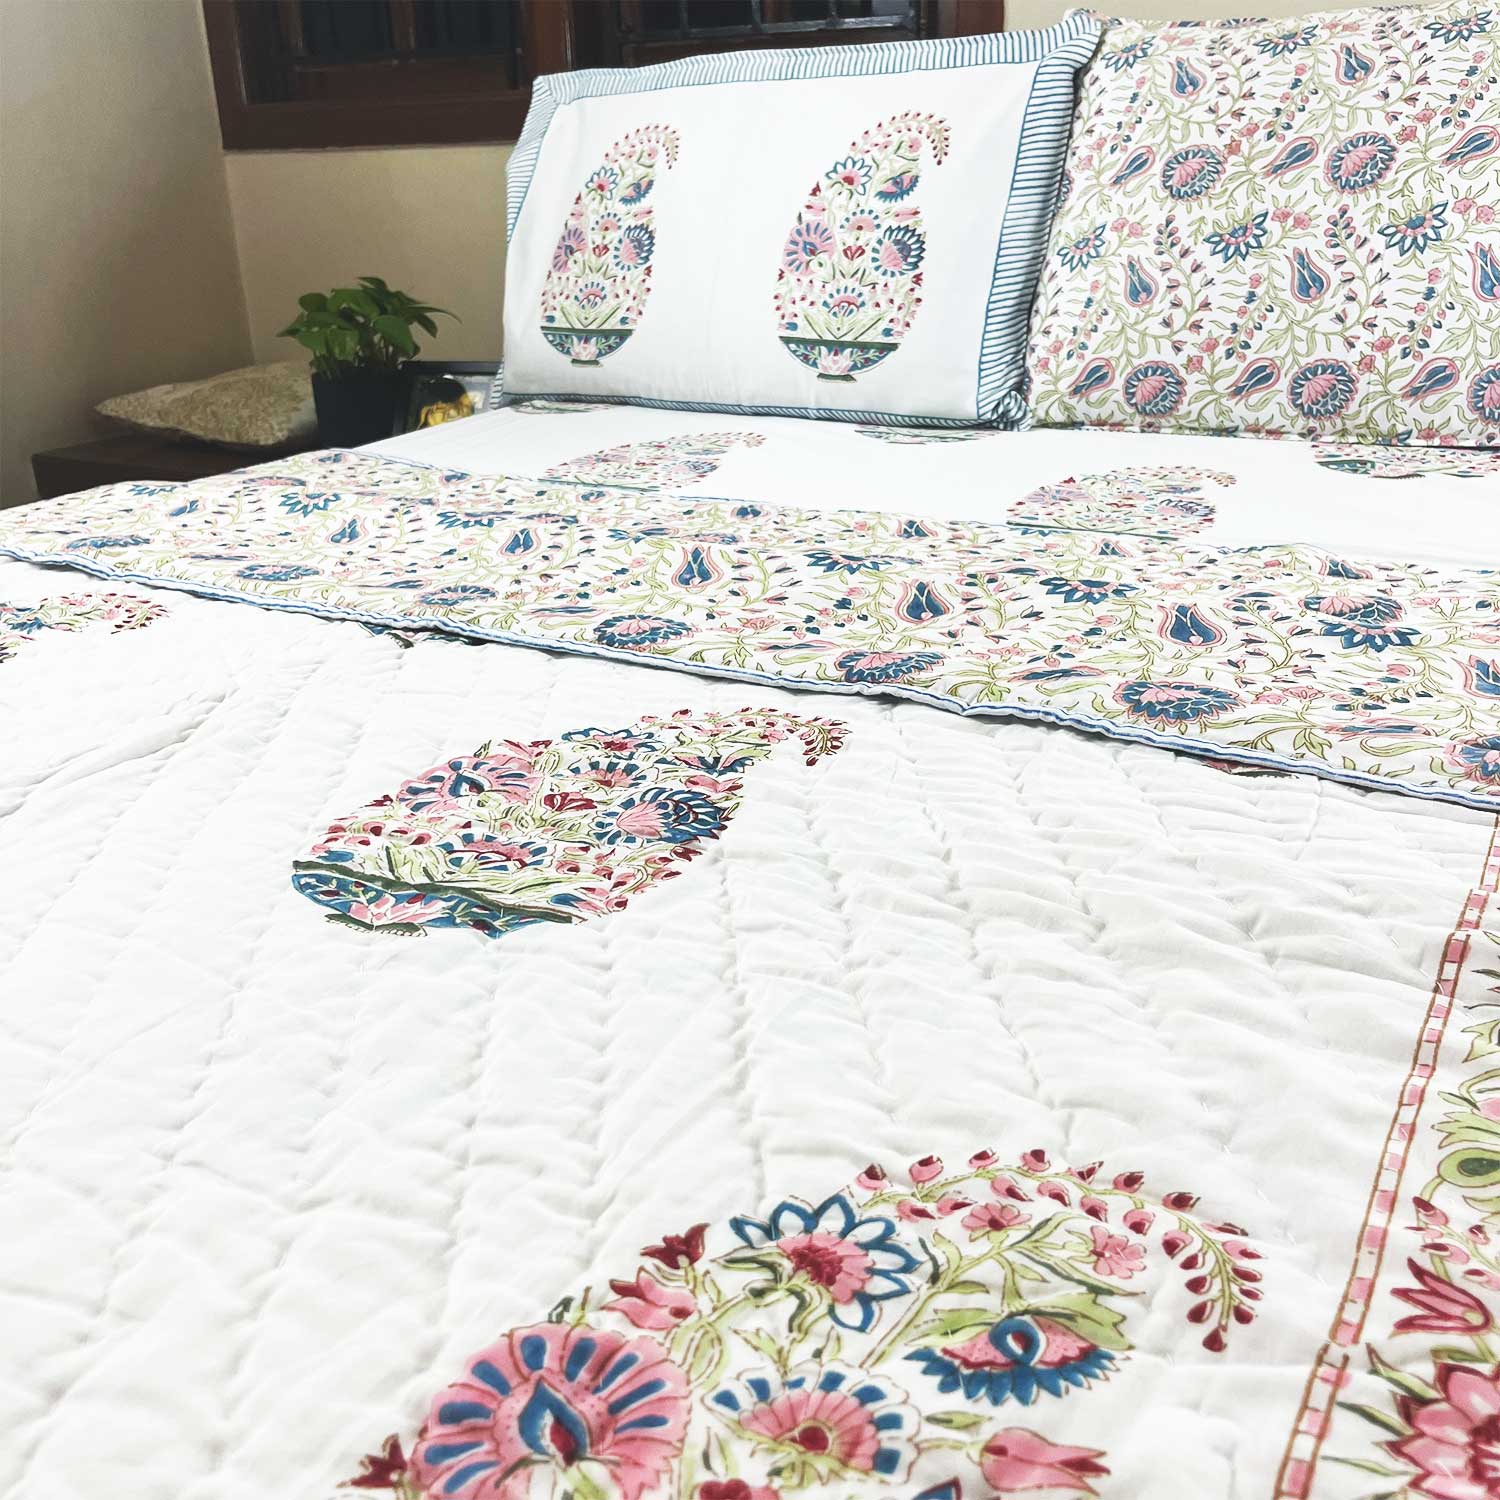 Soft & Cozy Pure Cotton Floral Printed Quilt - 60 inches x 90 inches